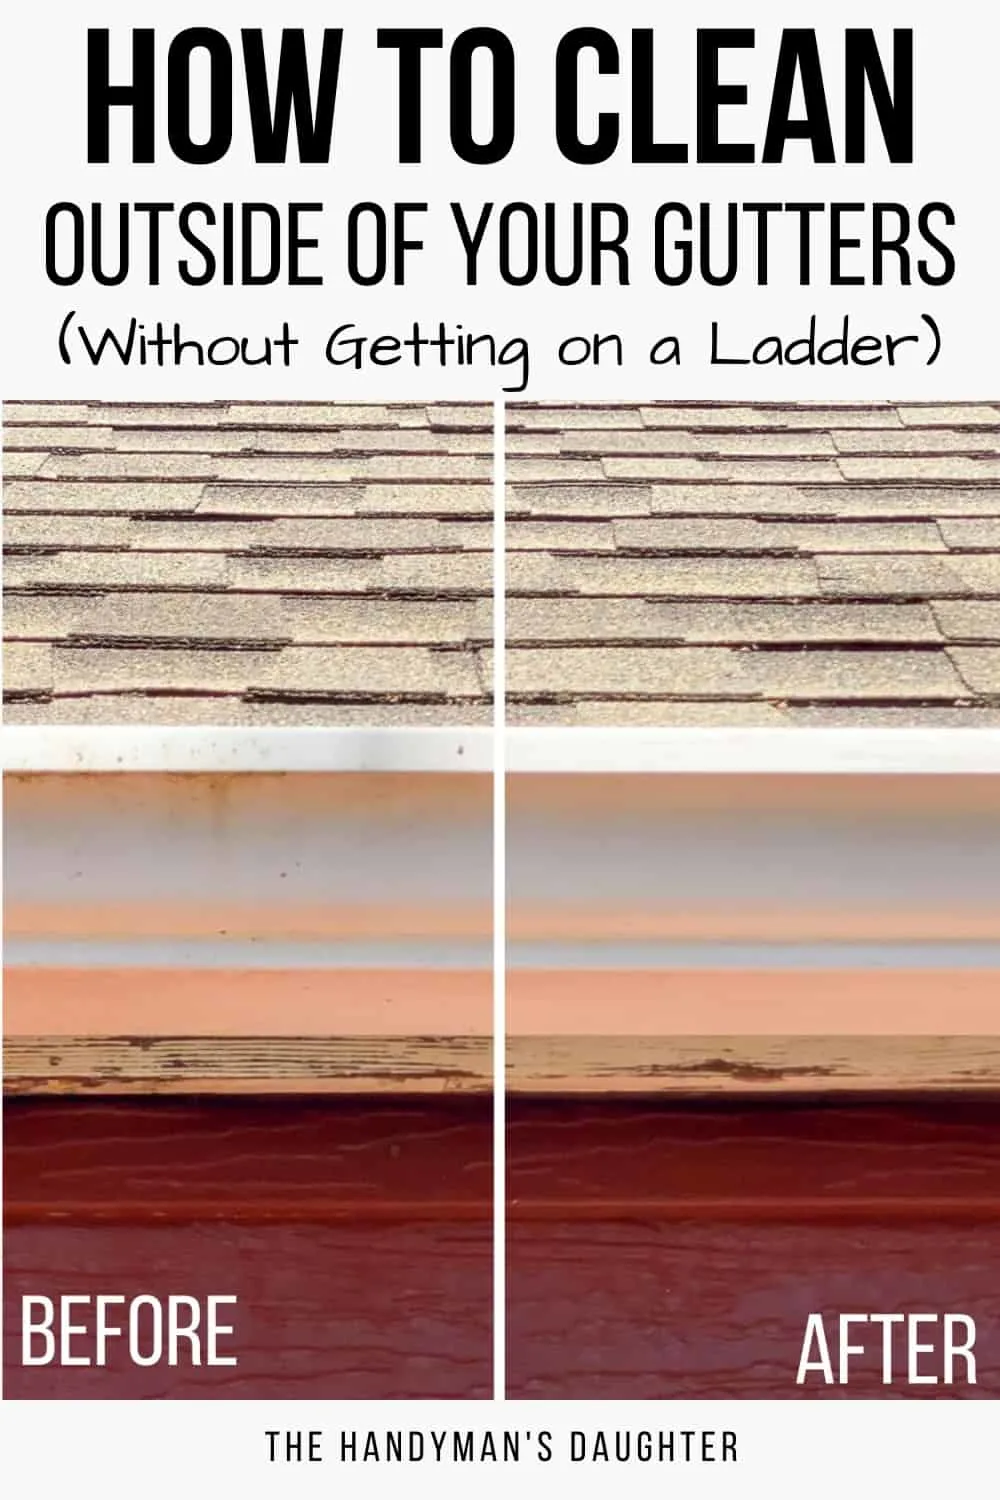 How to clean outside of gutters without getting on a ladder